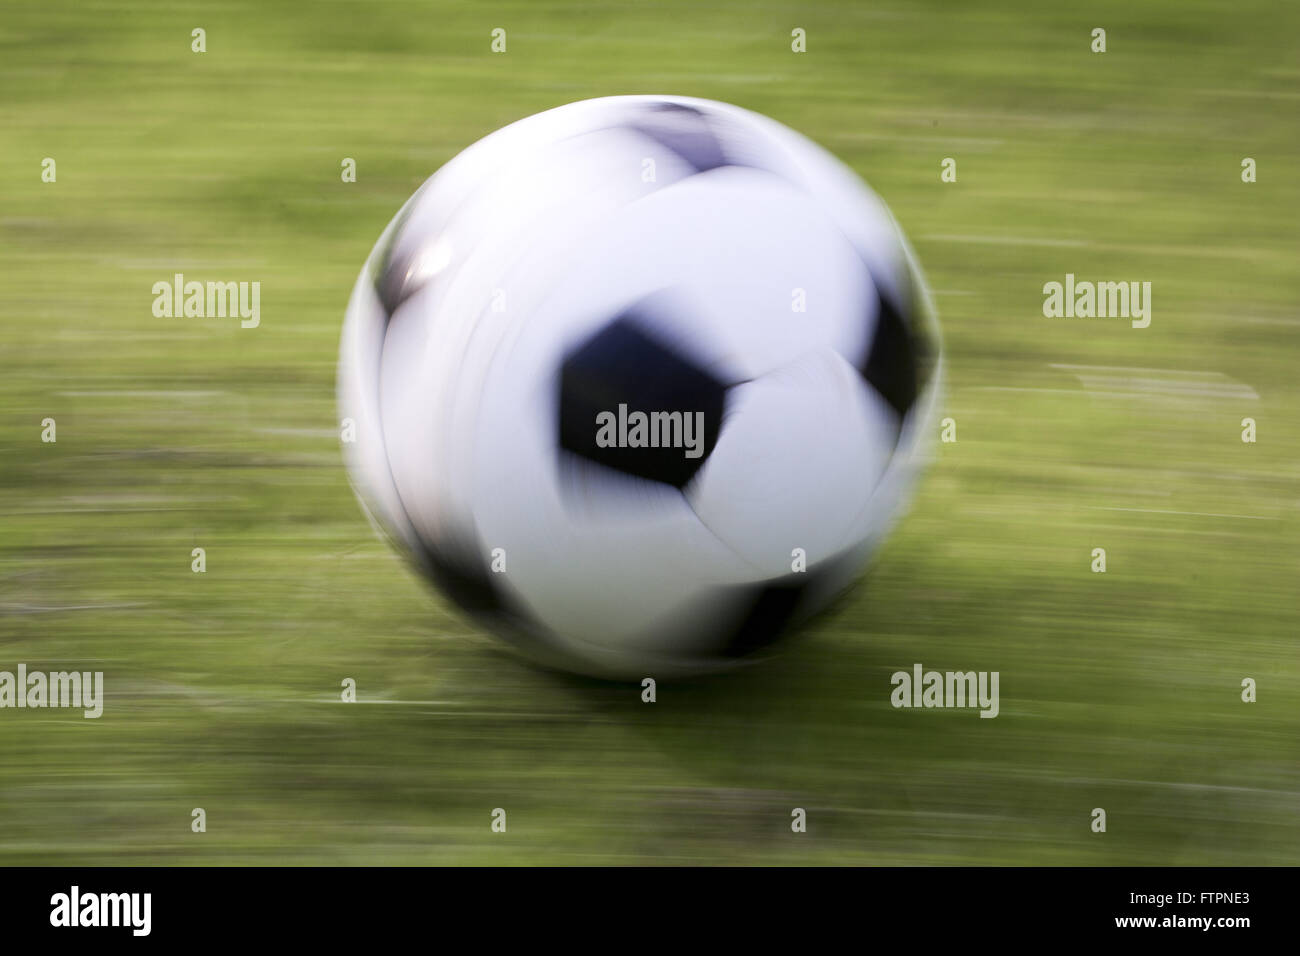 Soccer ball in motion on lawn Stock Photo